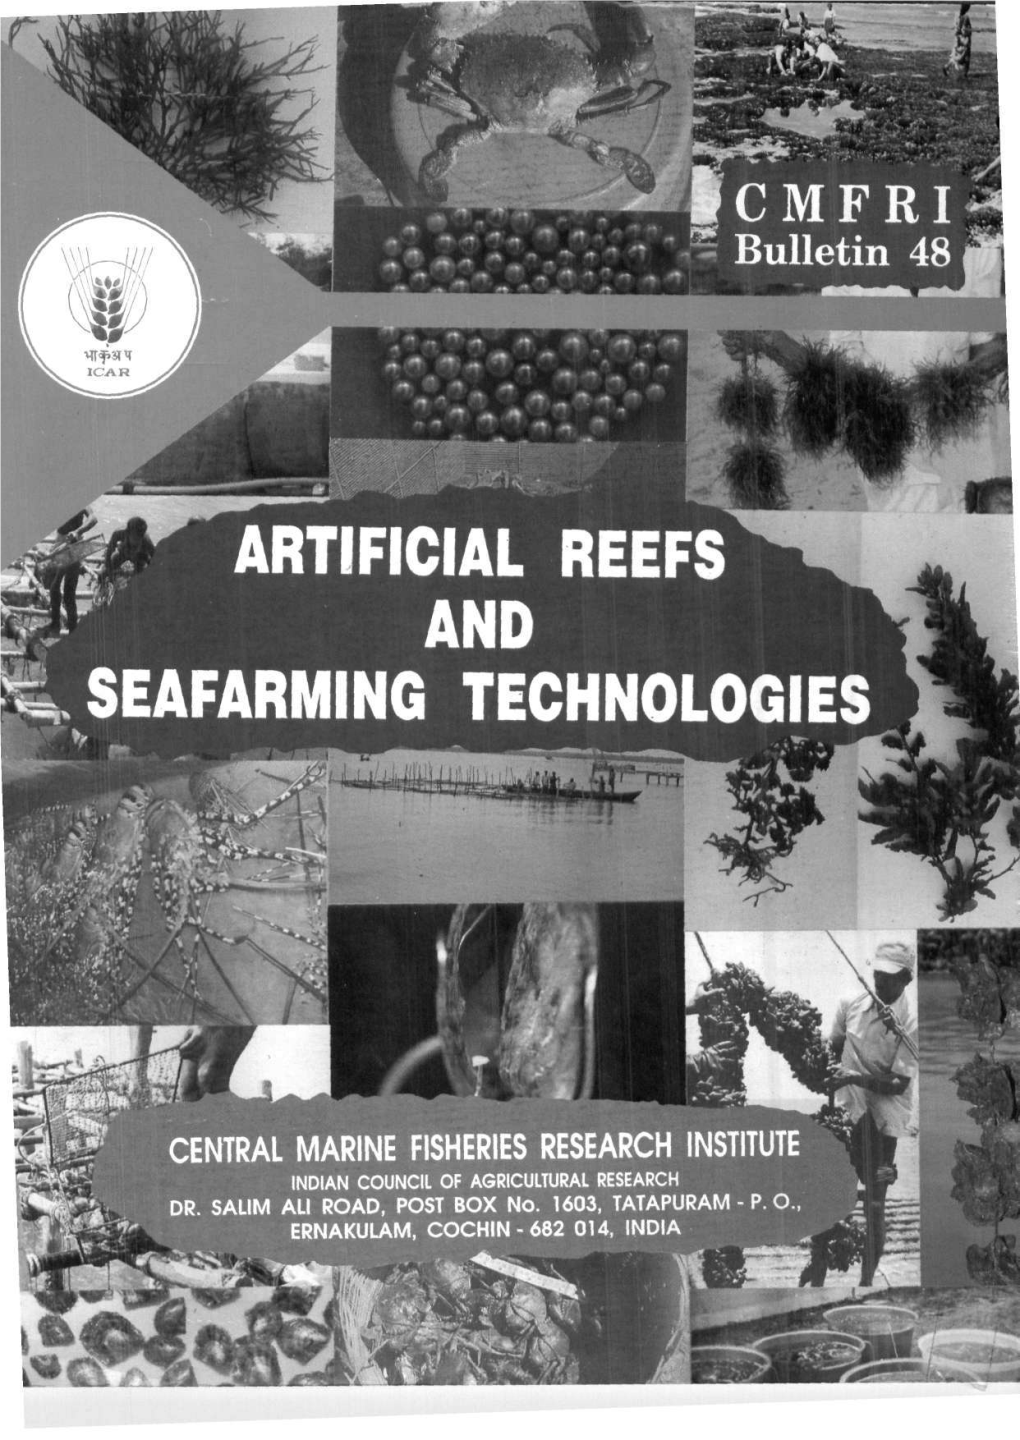 Artificial Reefs and Seafarming Technologies